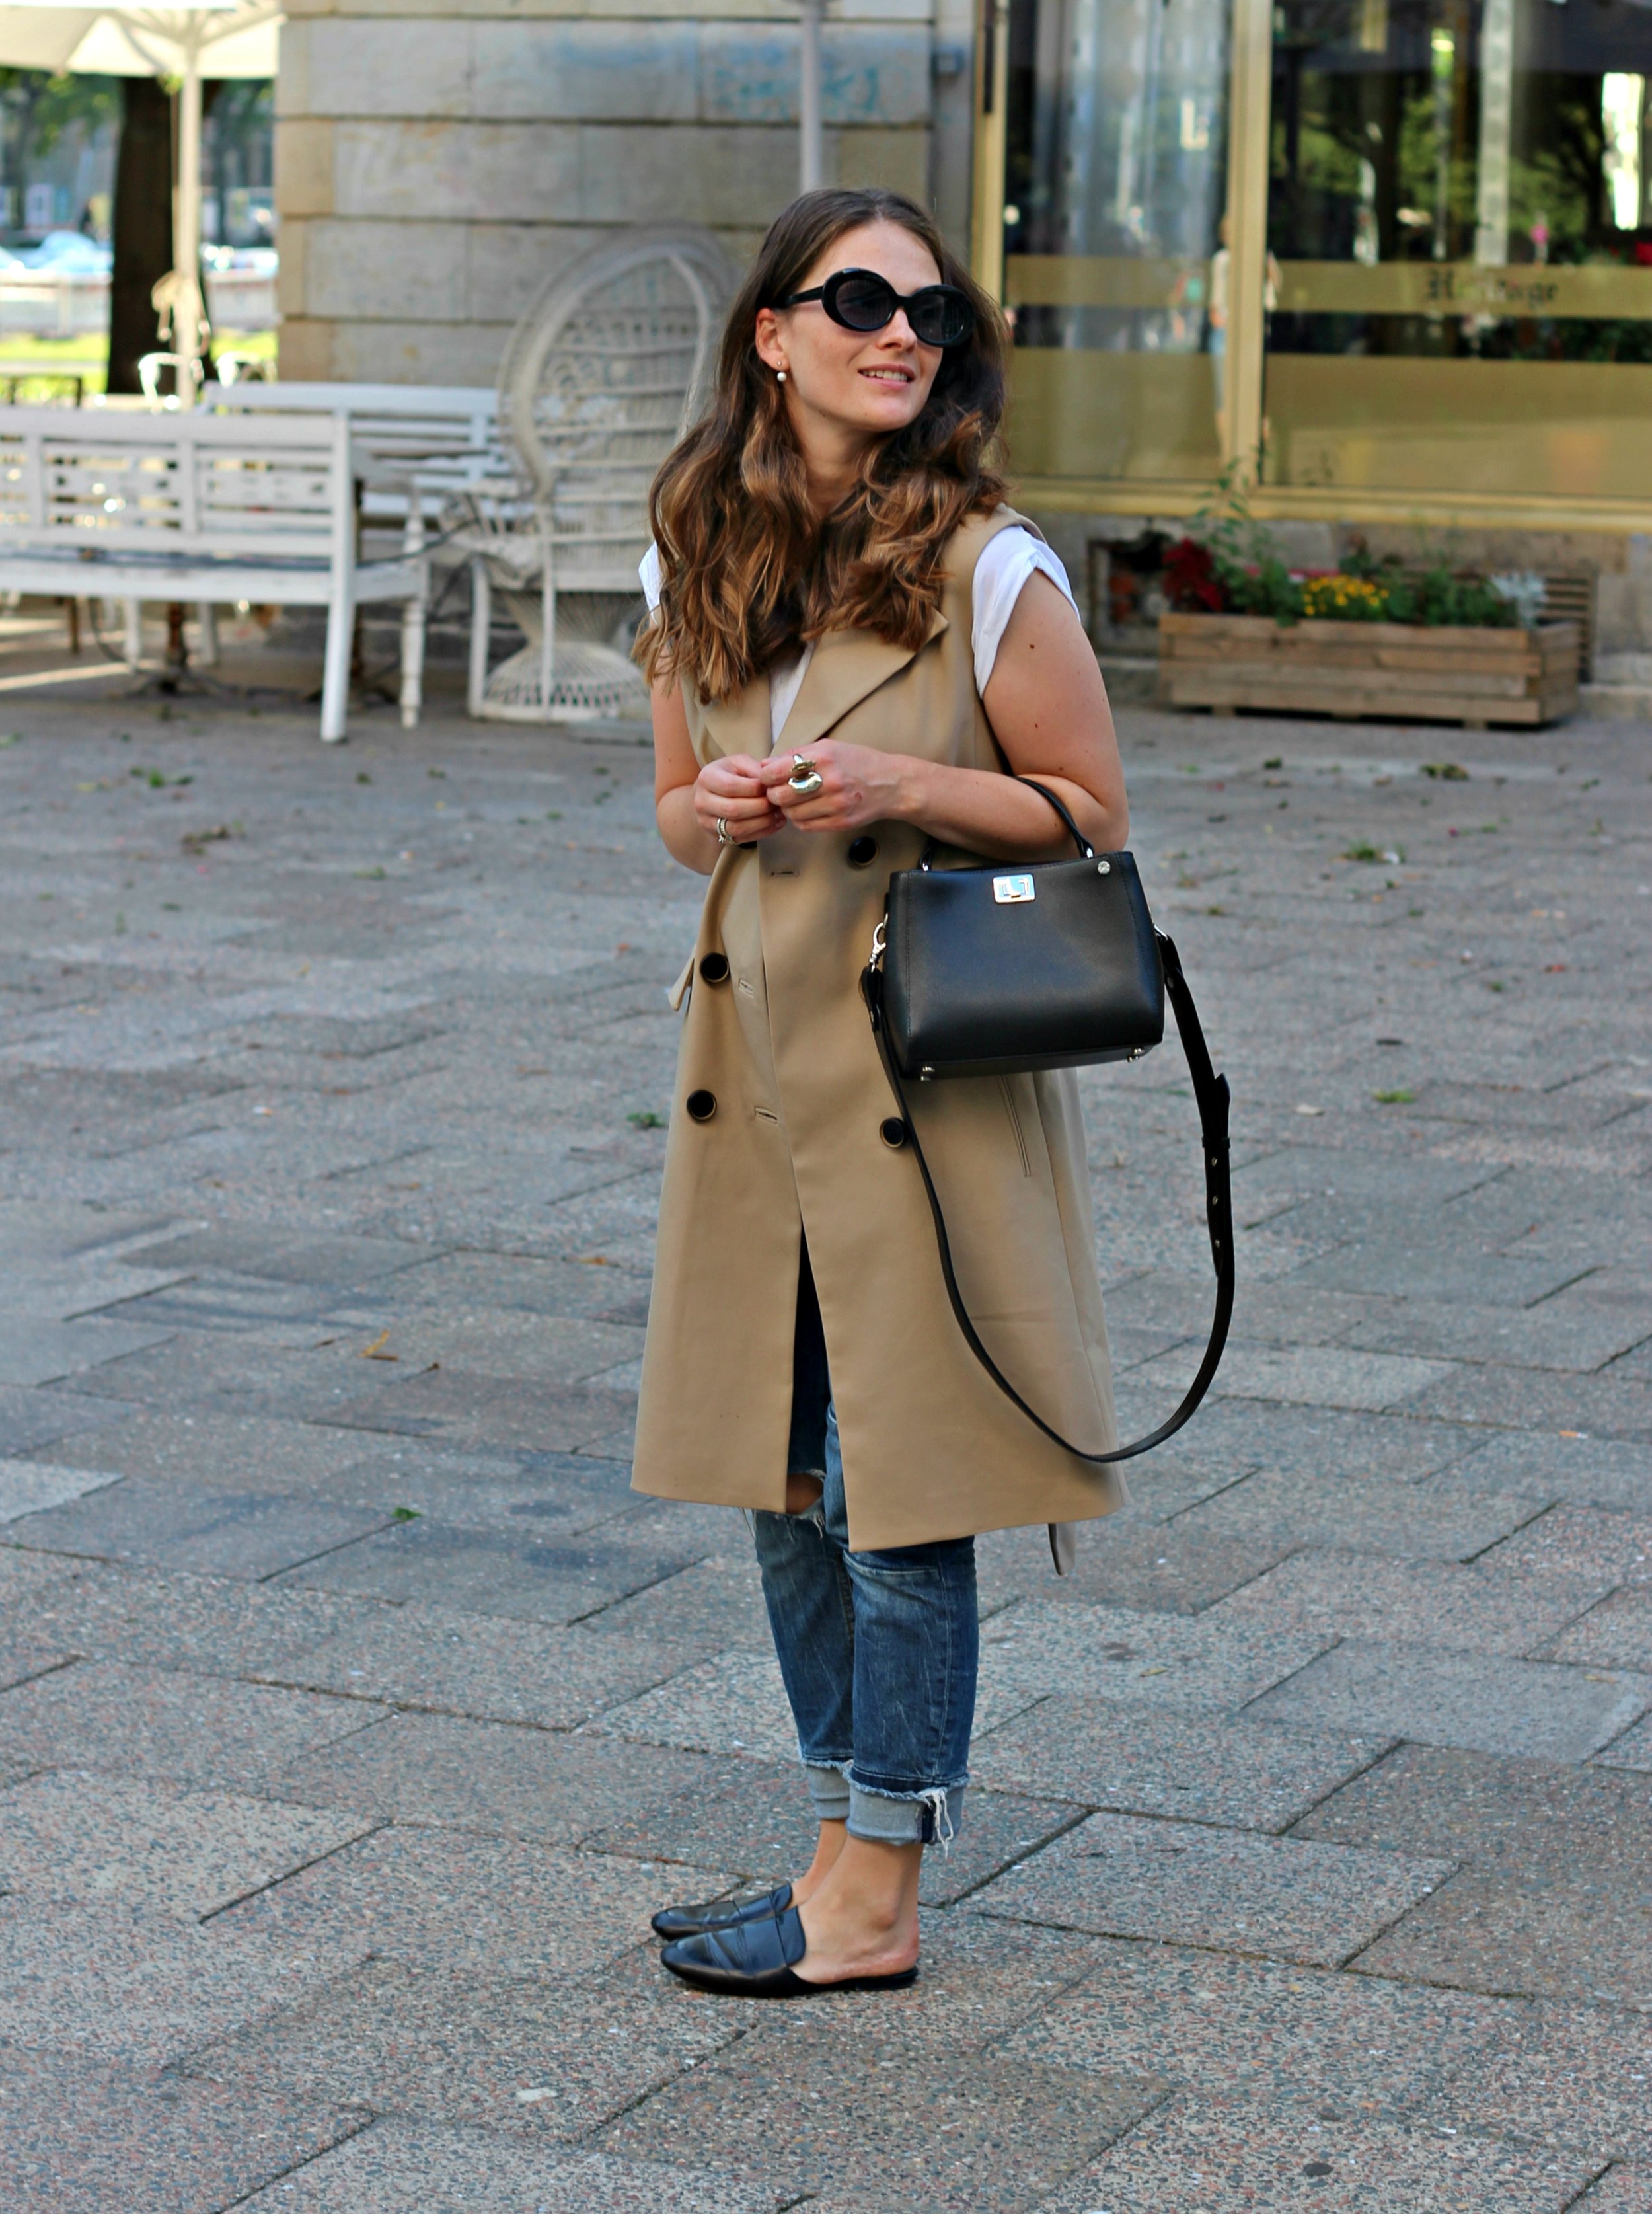 annaporter-vest-beige-casual-outfit-kachorovska-bag-2-updated